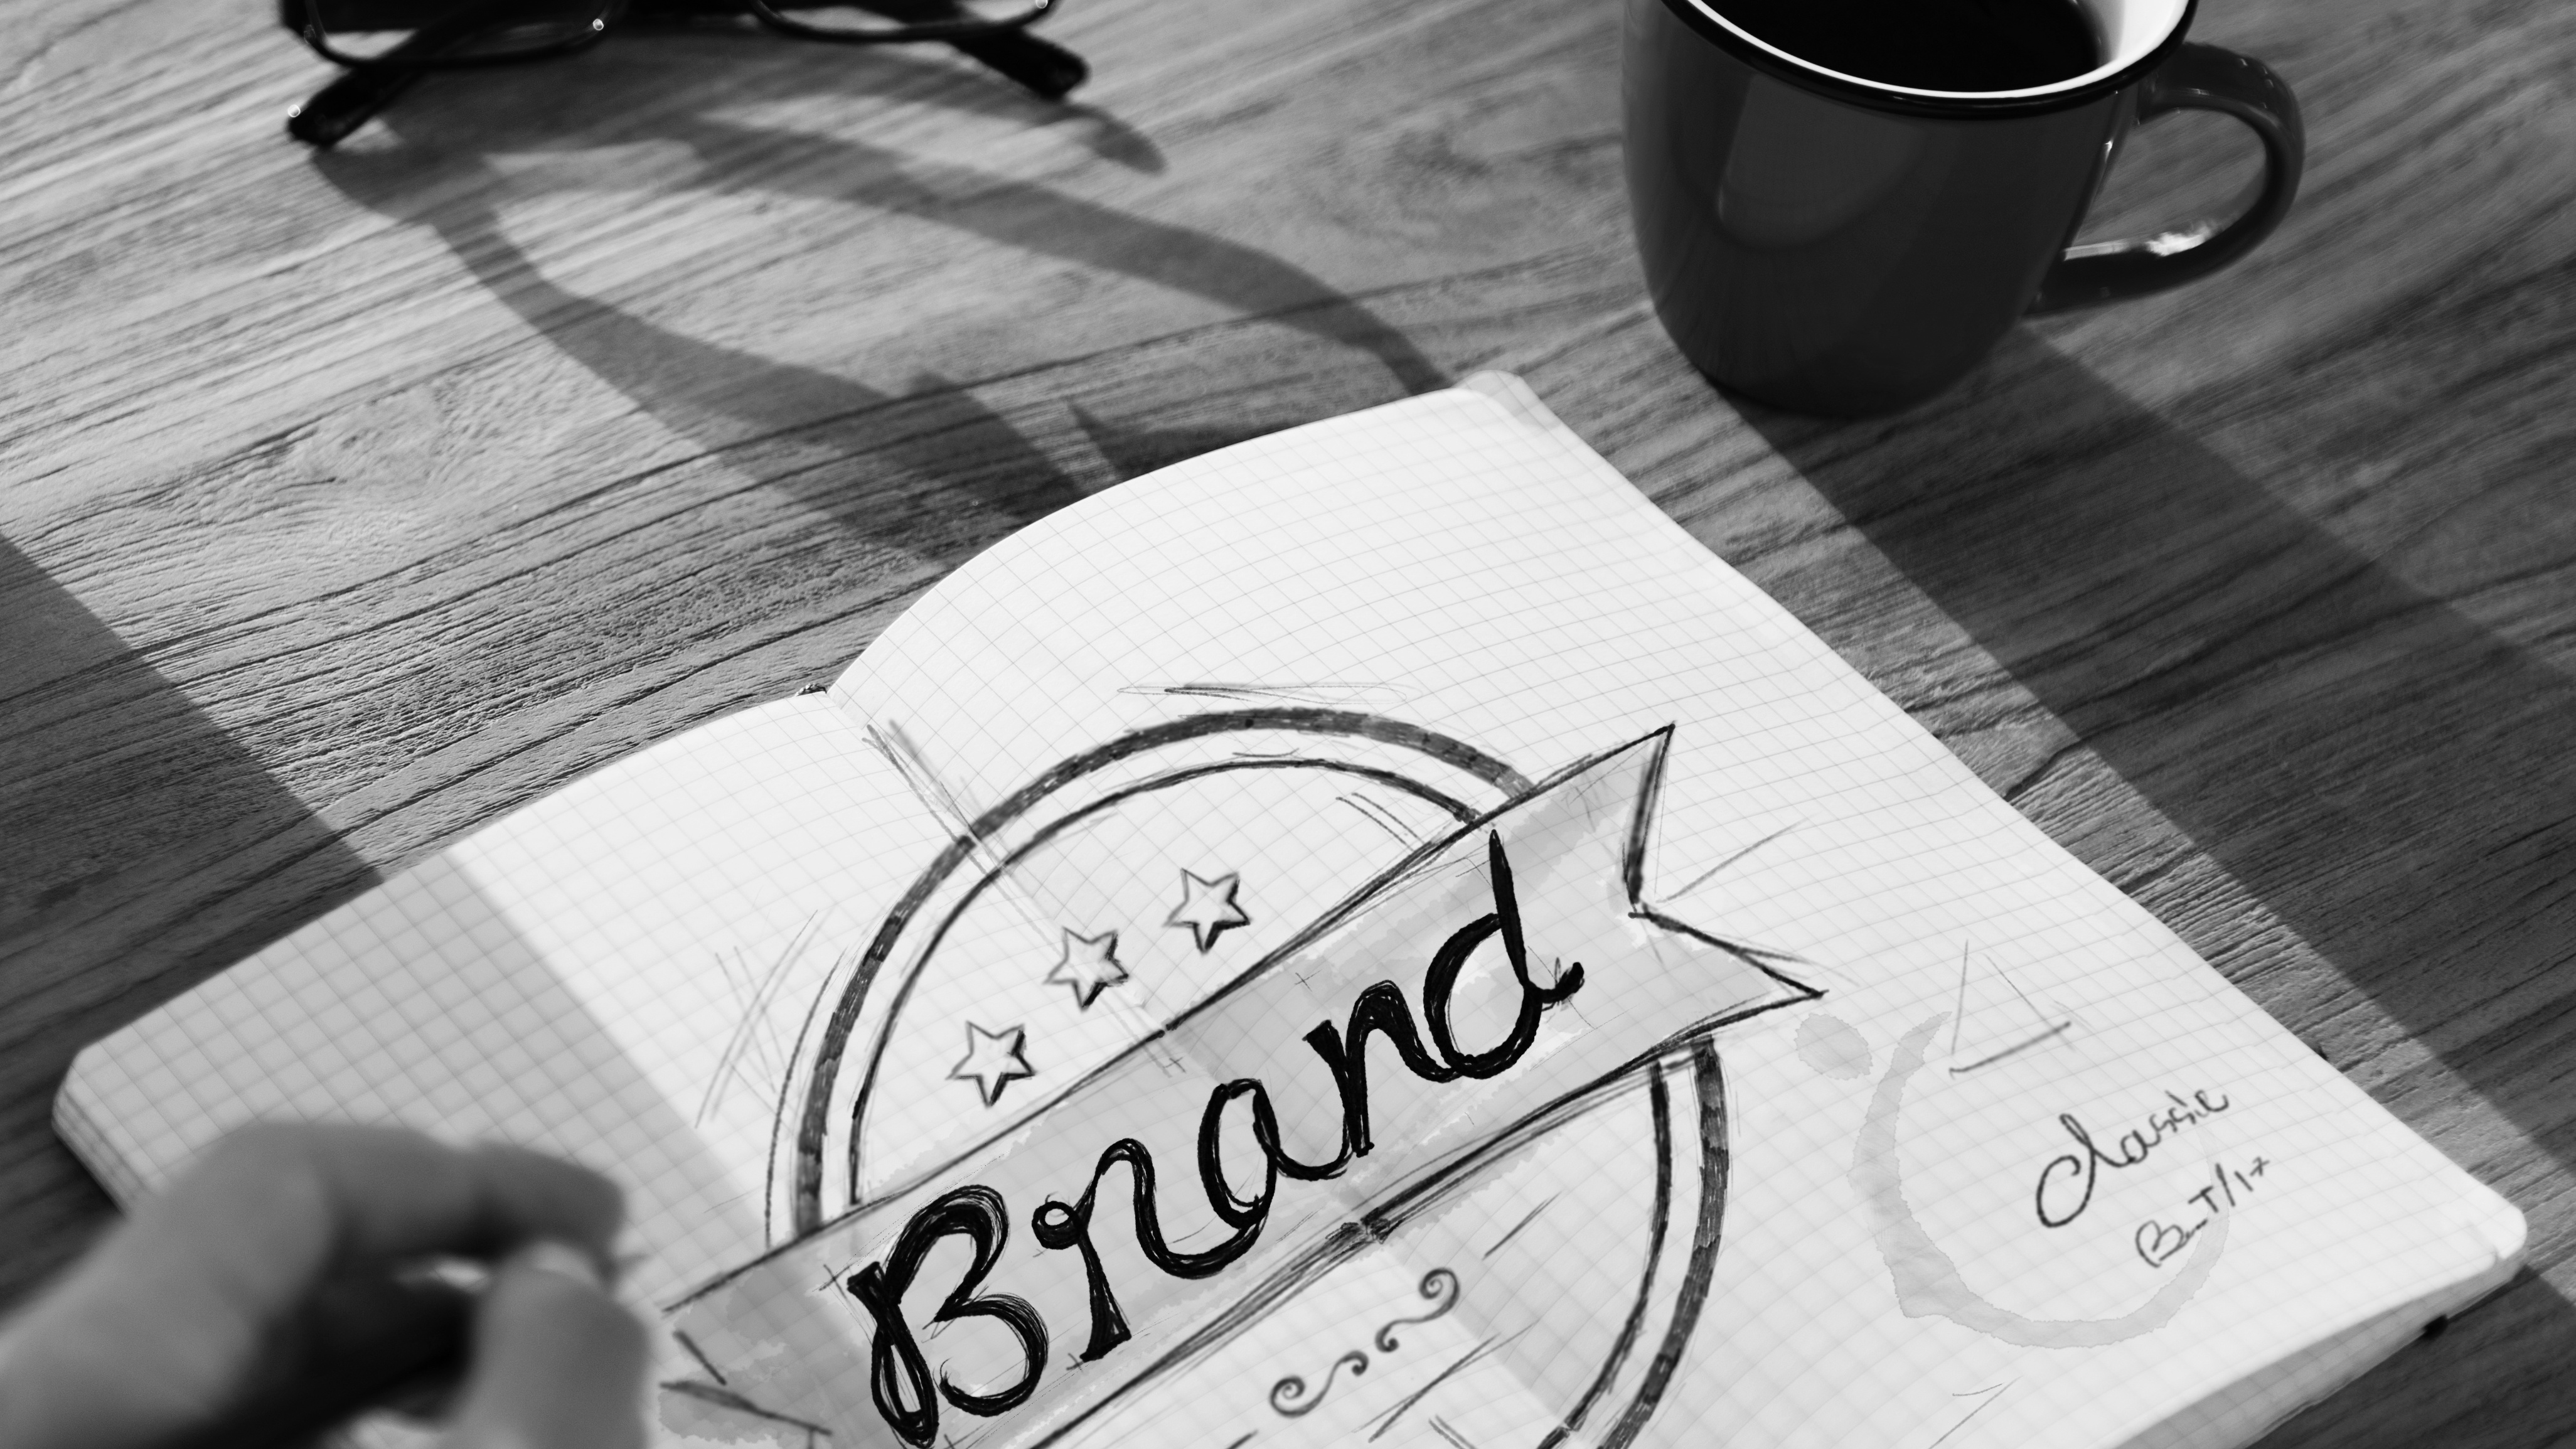 5 Essential Elements Your Personal Brand Needs